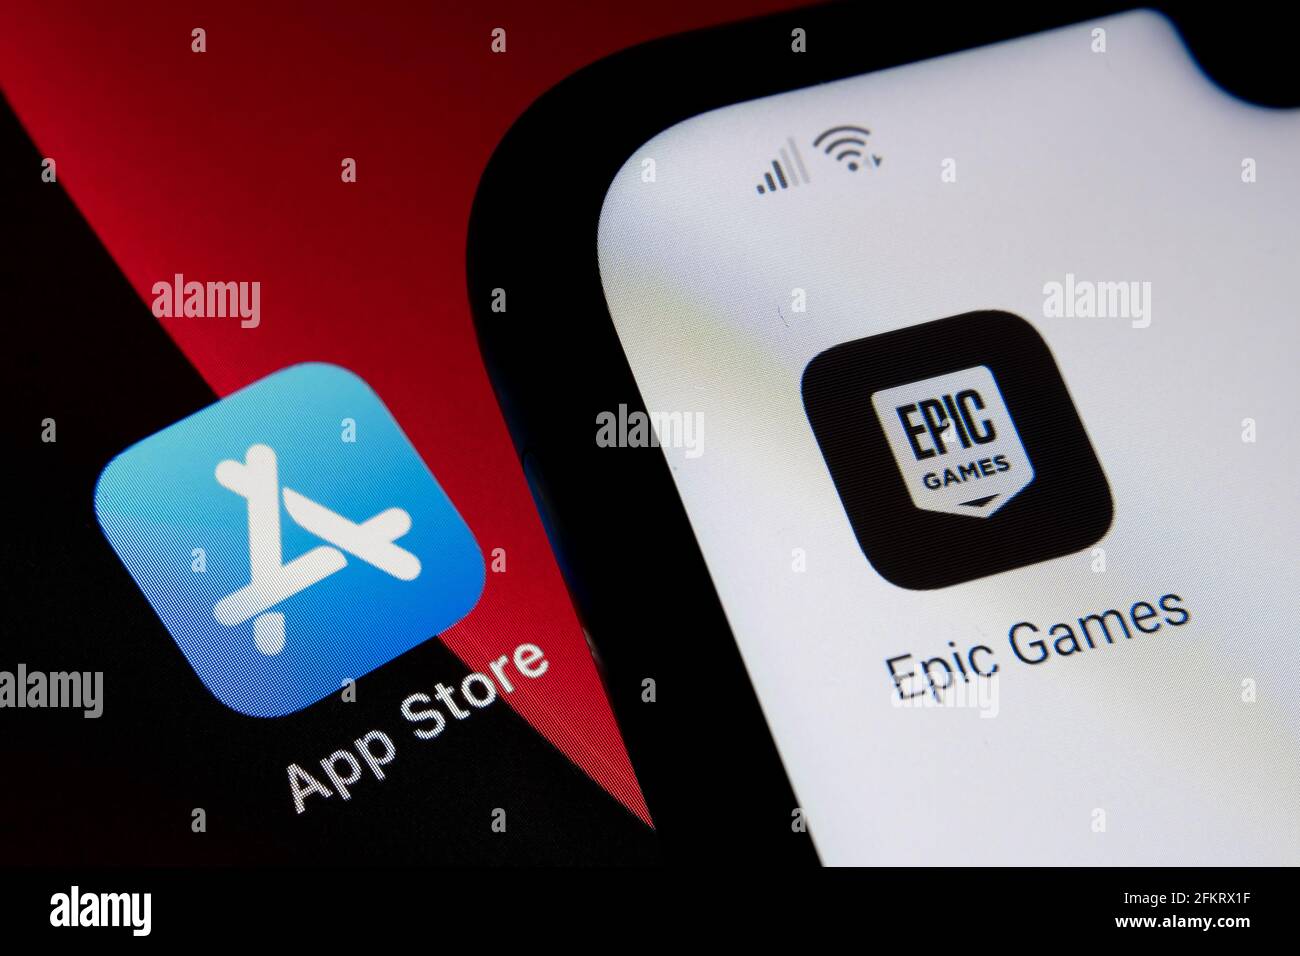 Epic games apple logo hi-res stock photography and images - Alamy